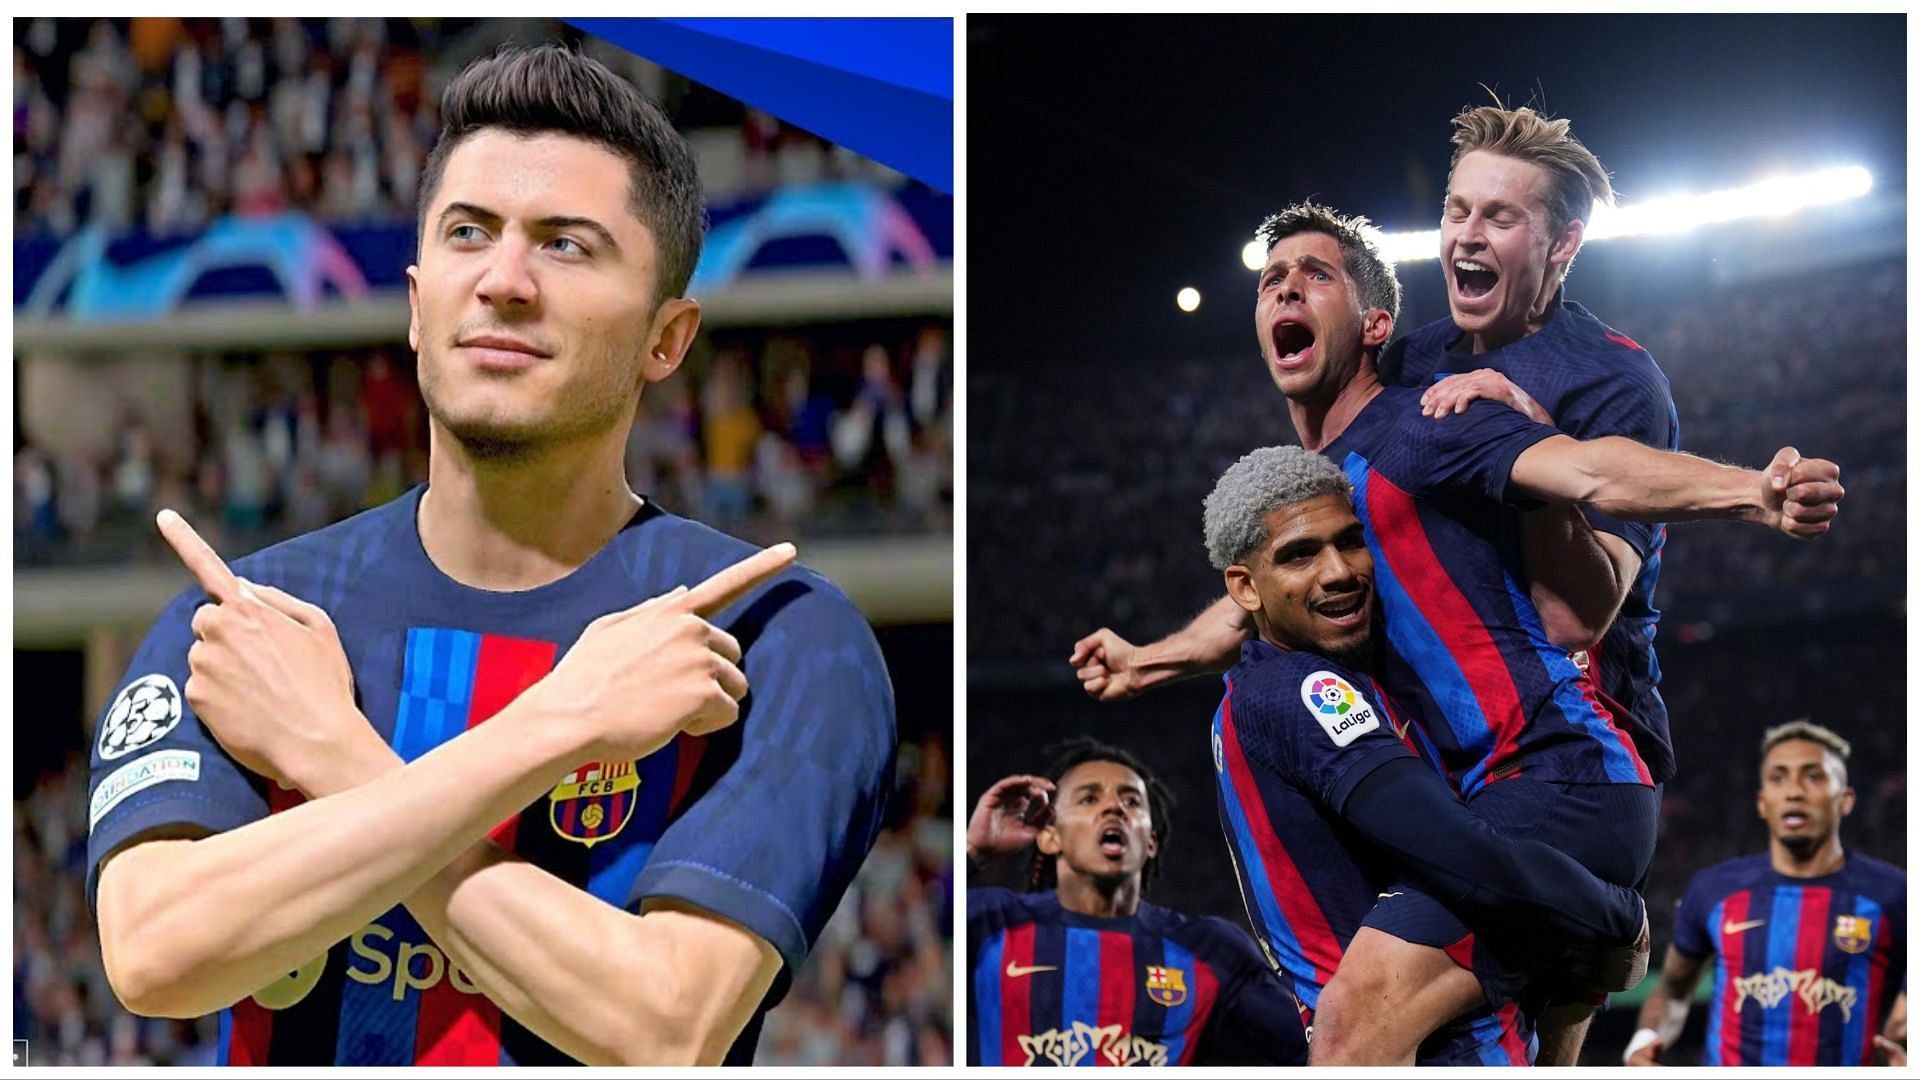 10 Highest-rated Barca players on new FIFA 24 - Football